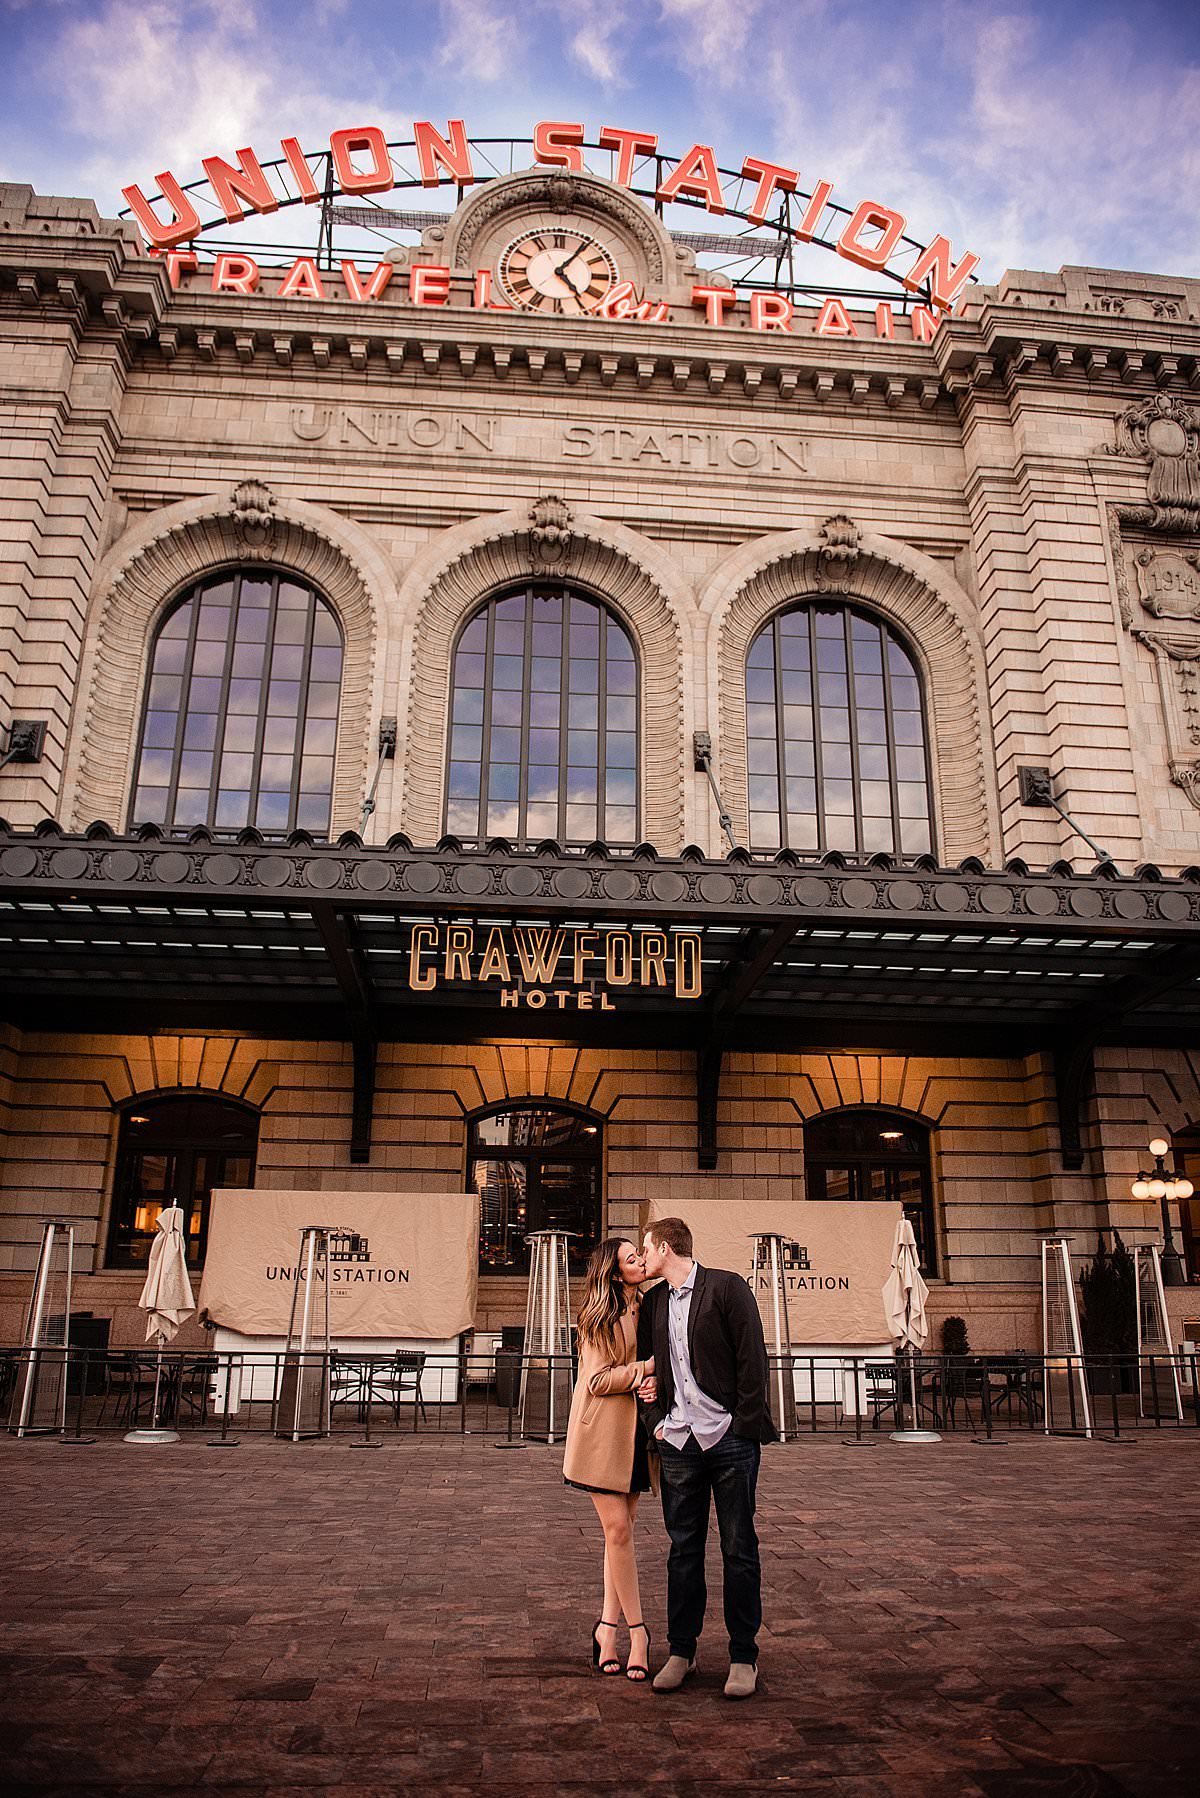 Social media influencer with her finace standing in front of historic Union Station train station in Denver Colorado